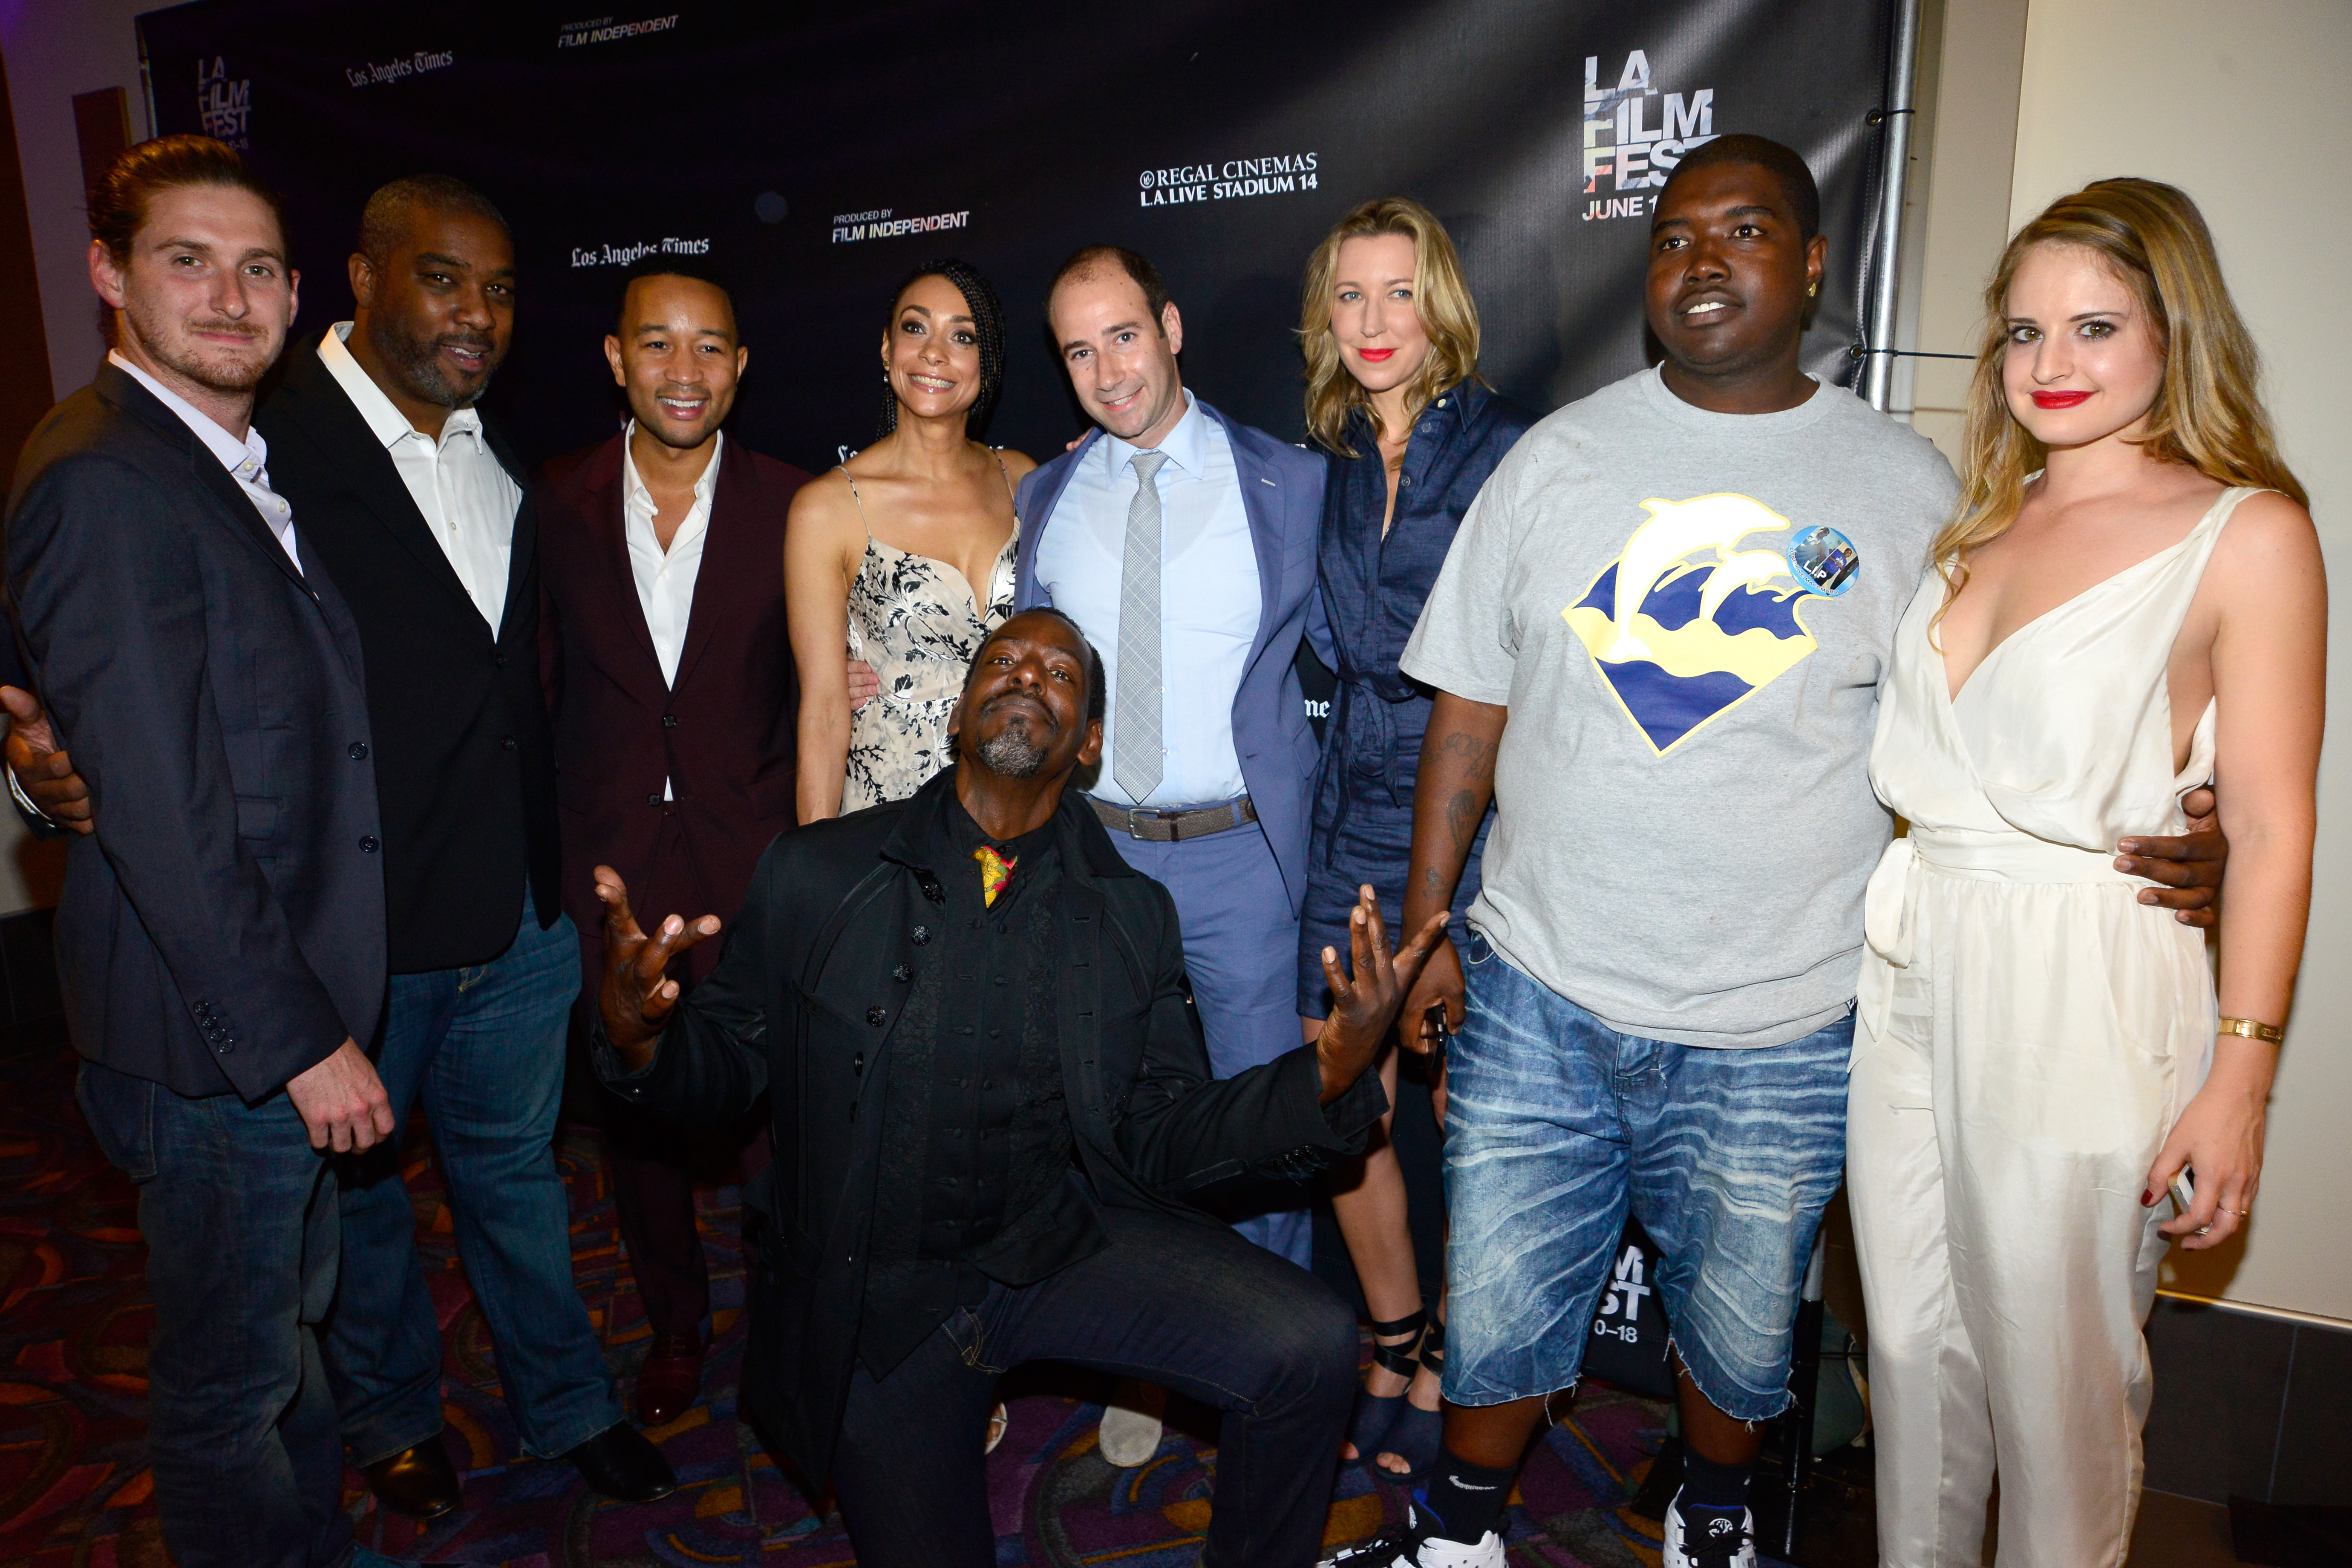 Cast and crew attend the 'Can You Dig This' screening during the 2015 Los Angeles Film Festival at Regal Cinemas L.A. Live on June 11, 2015 in Los Angeles, California.